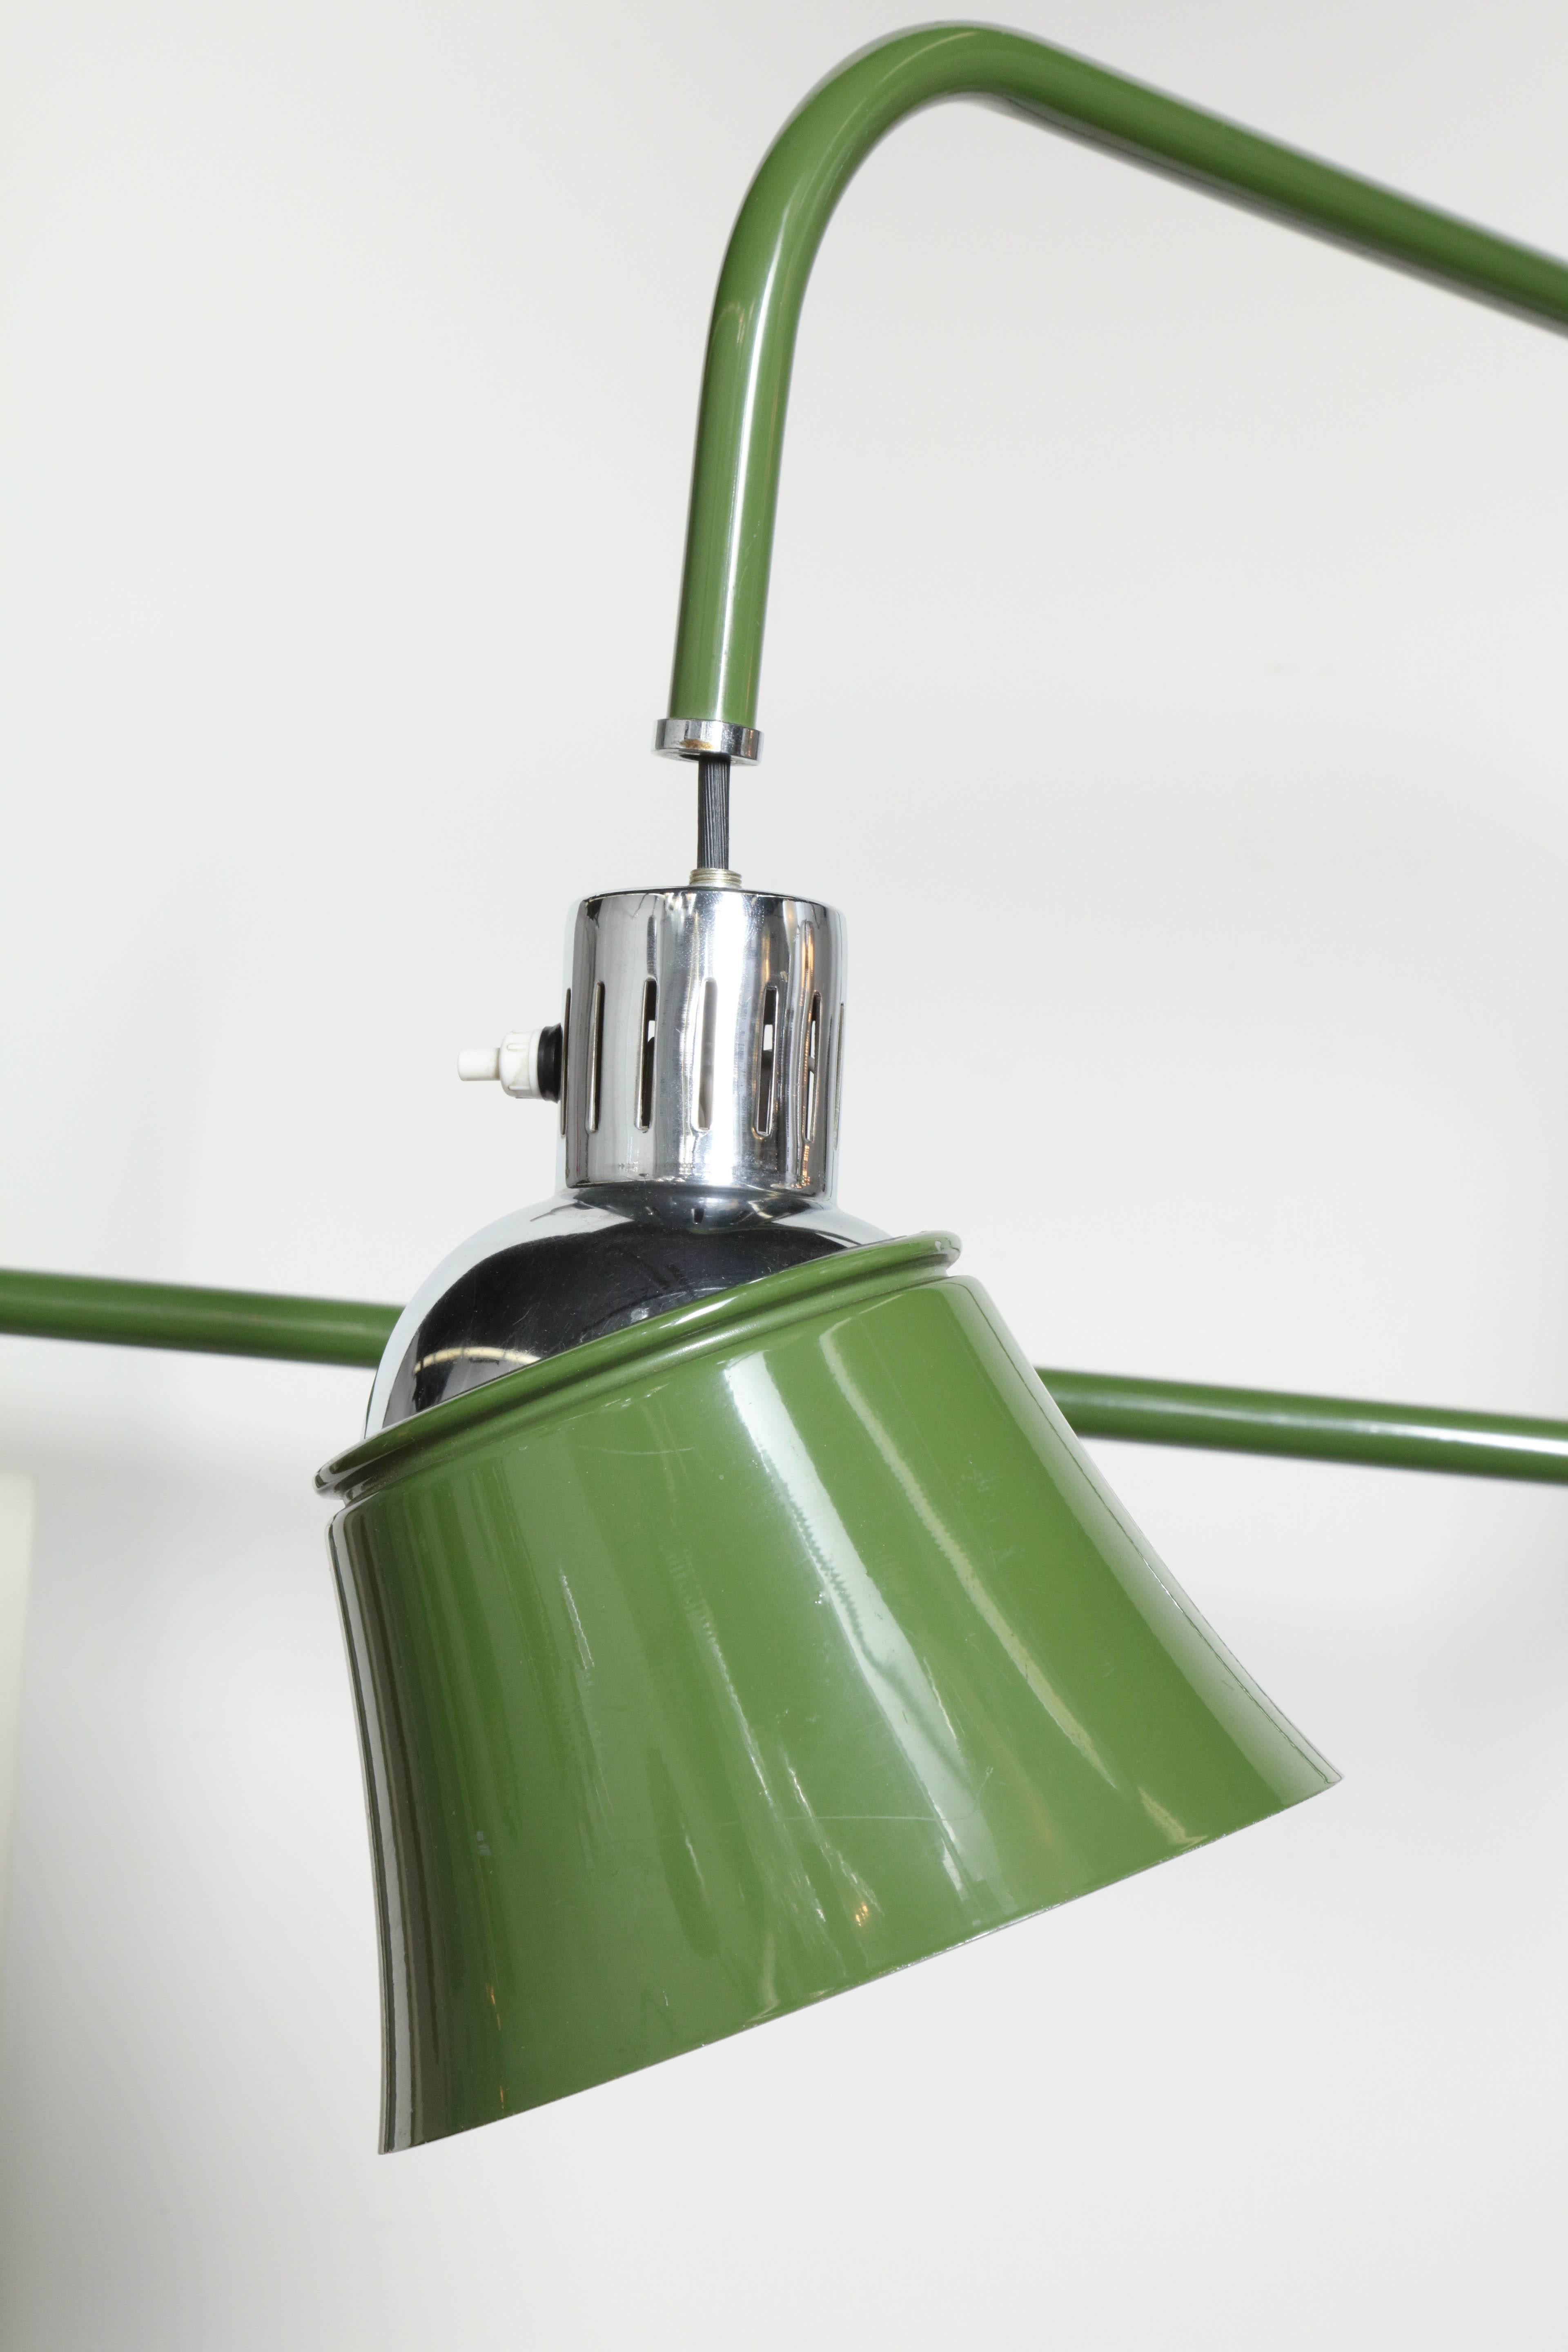 Hand-Painted Bormann Wall Light Made by the Bauhaus in Germany 1930 For Sale